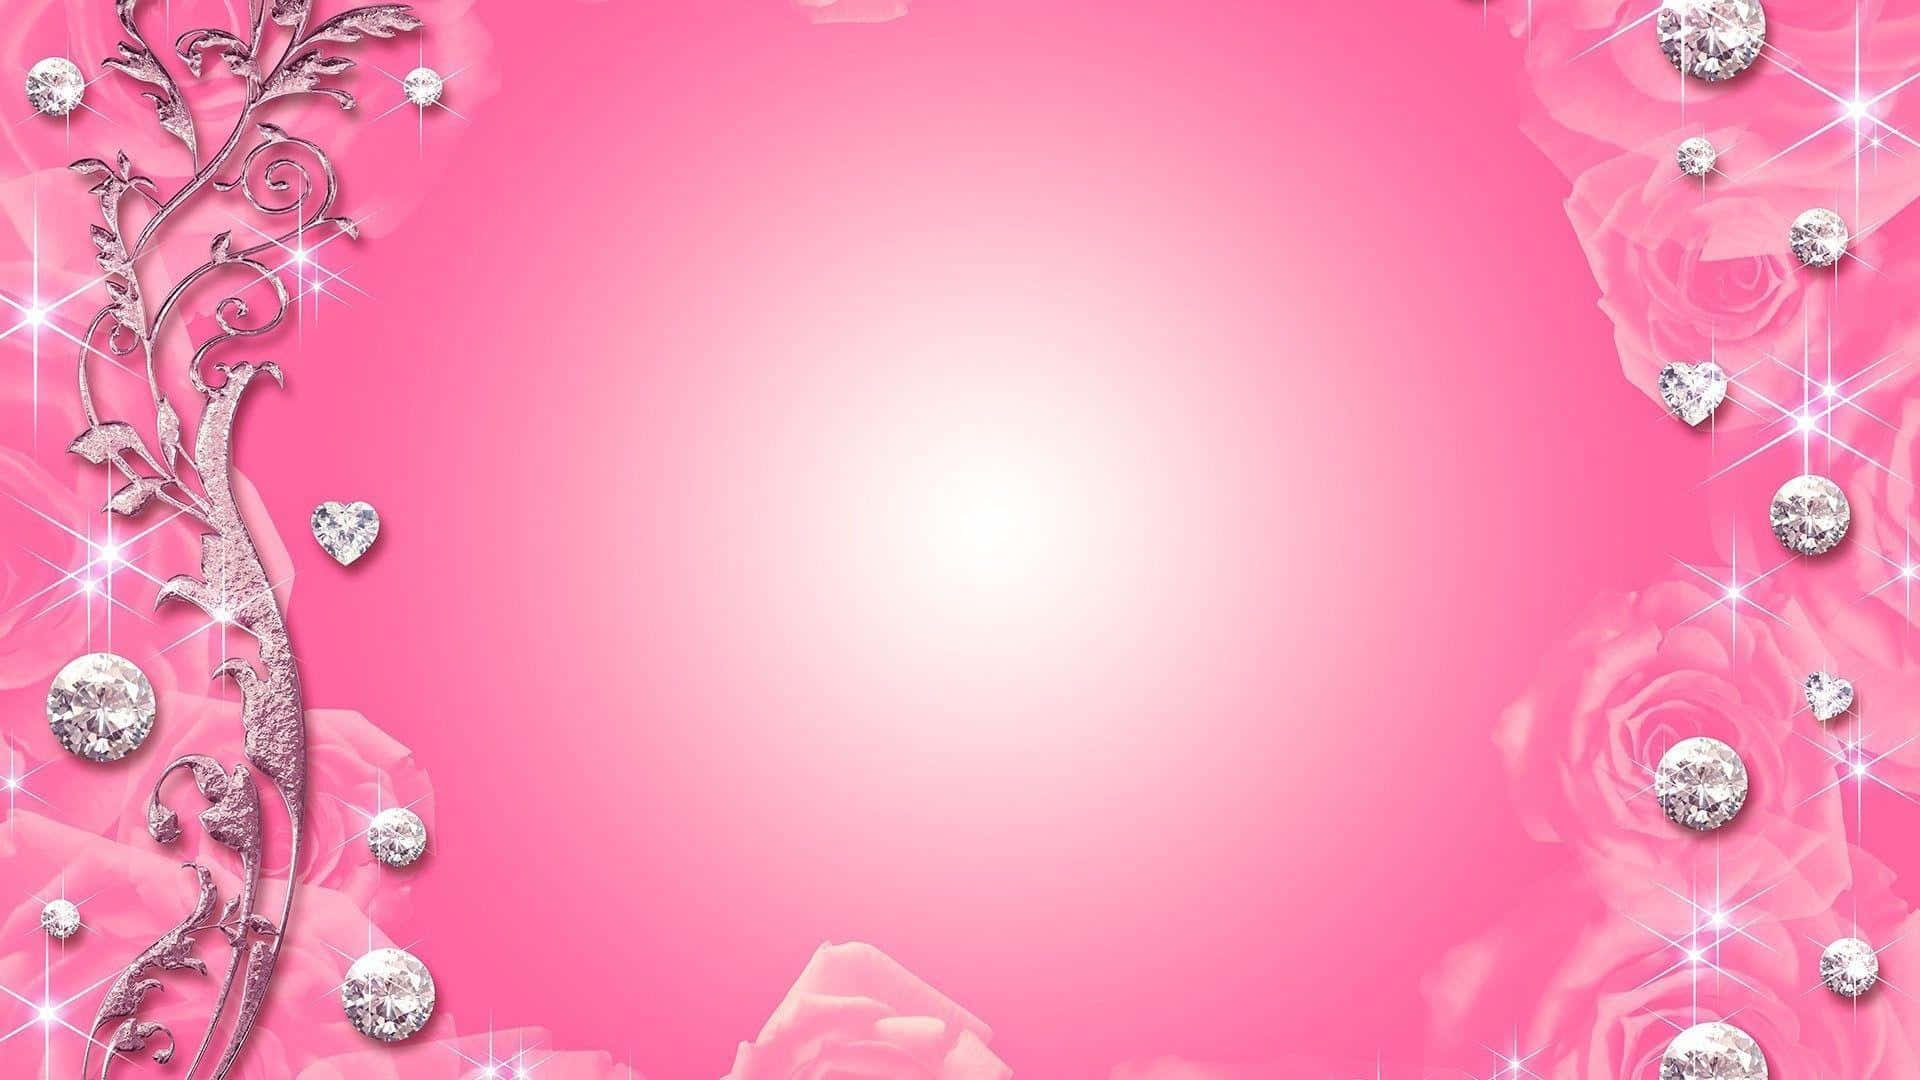 A beautiful wallpaper featuring a cute pink background